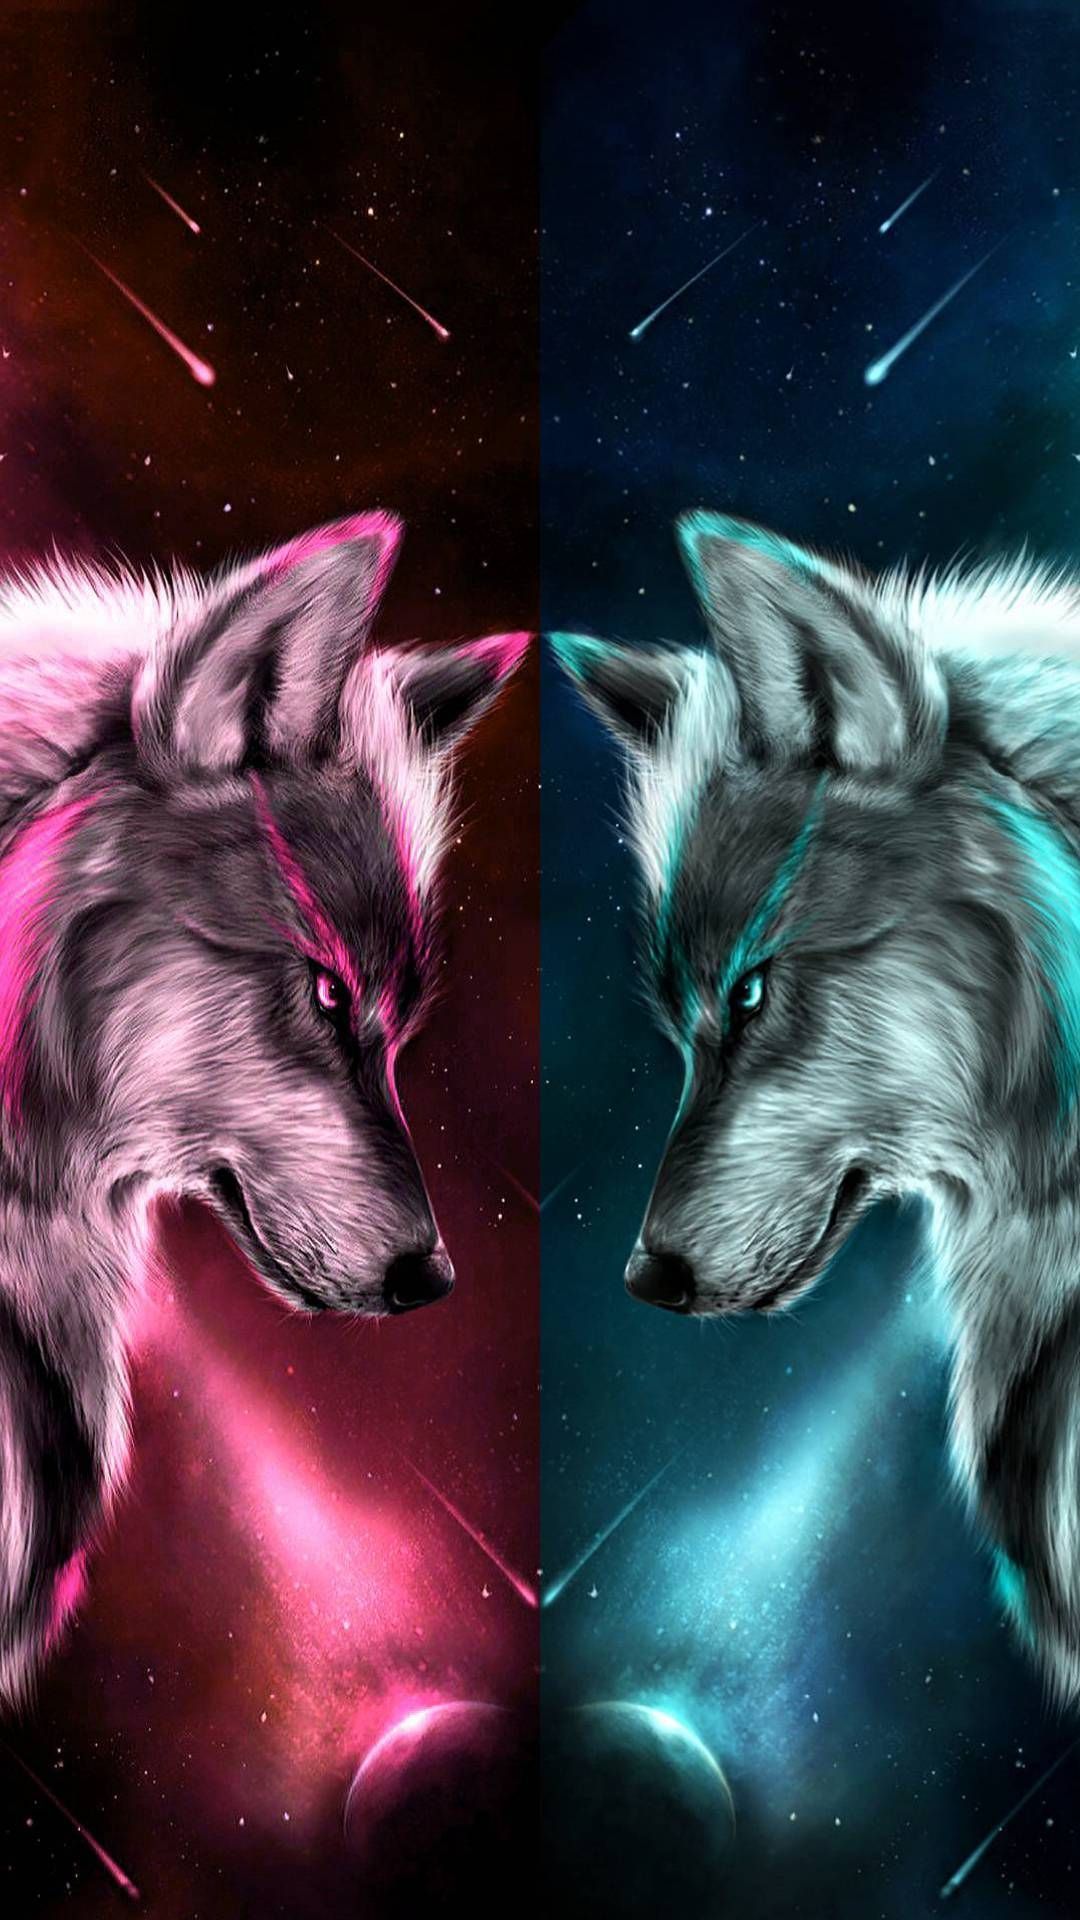 Epic Wolf Wallpaper High Definition Hupages Download iPhone Wallpaper. Wolf wallpaper, Wolf spirit animal, Animal wallpaper